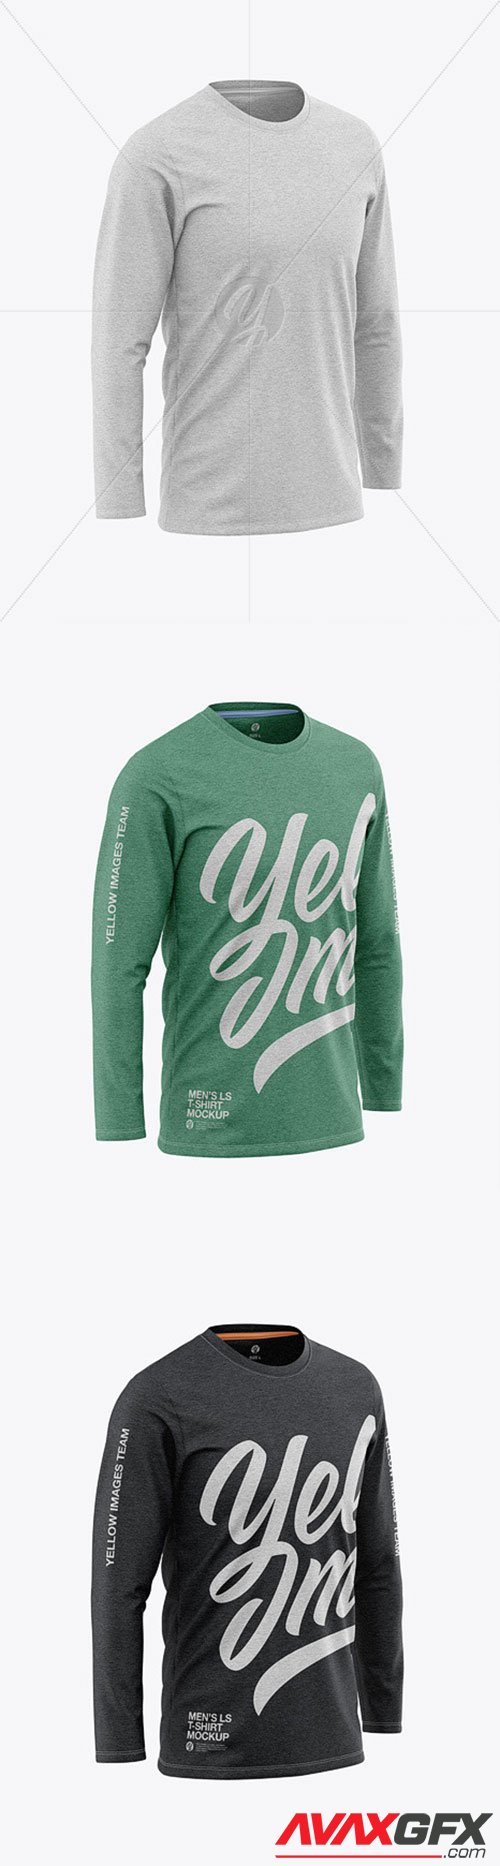 Men's Heather Long Sleeve T-Shirt Mockup - Front View ...